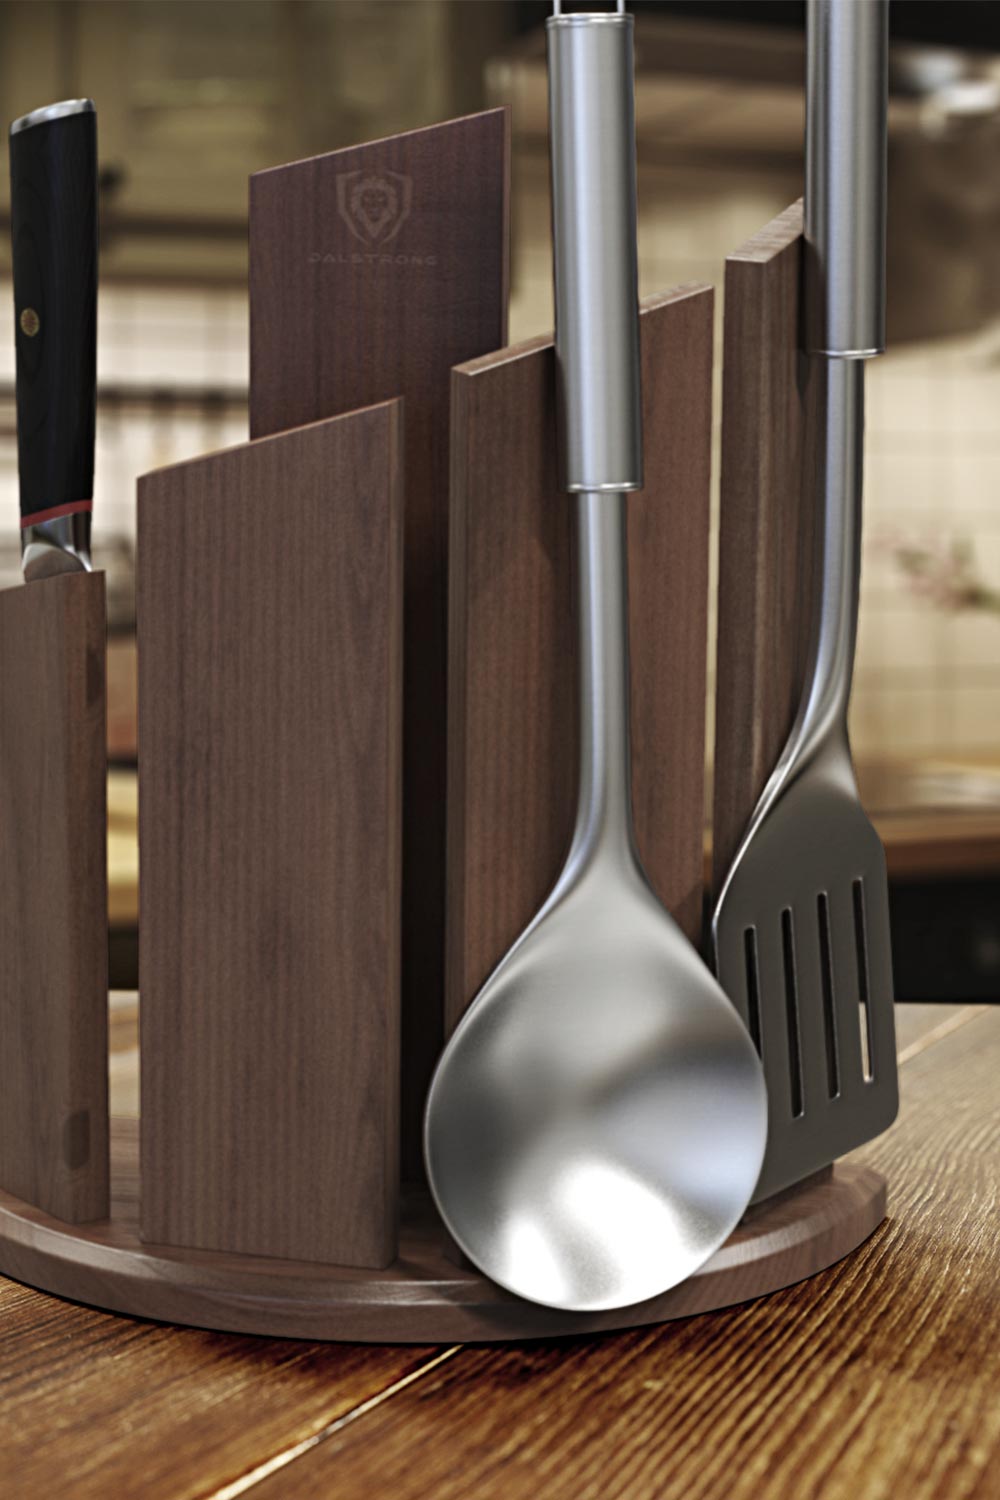 Dalstrong phantom series 6 piece knife set with dragon spire block and two kitchen utensils on it.